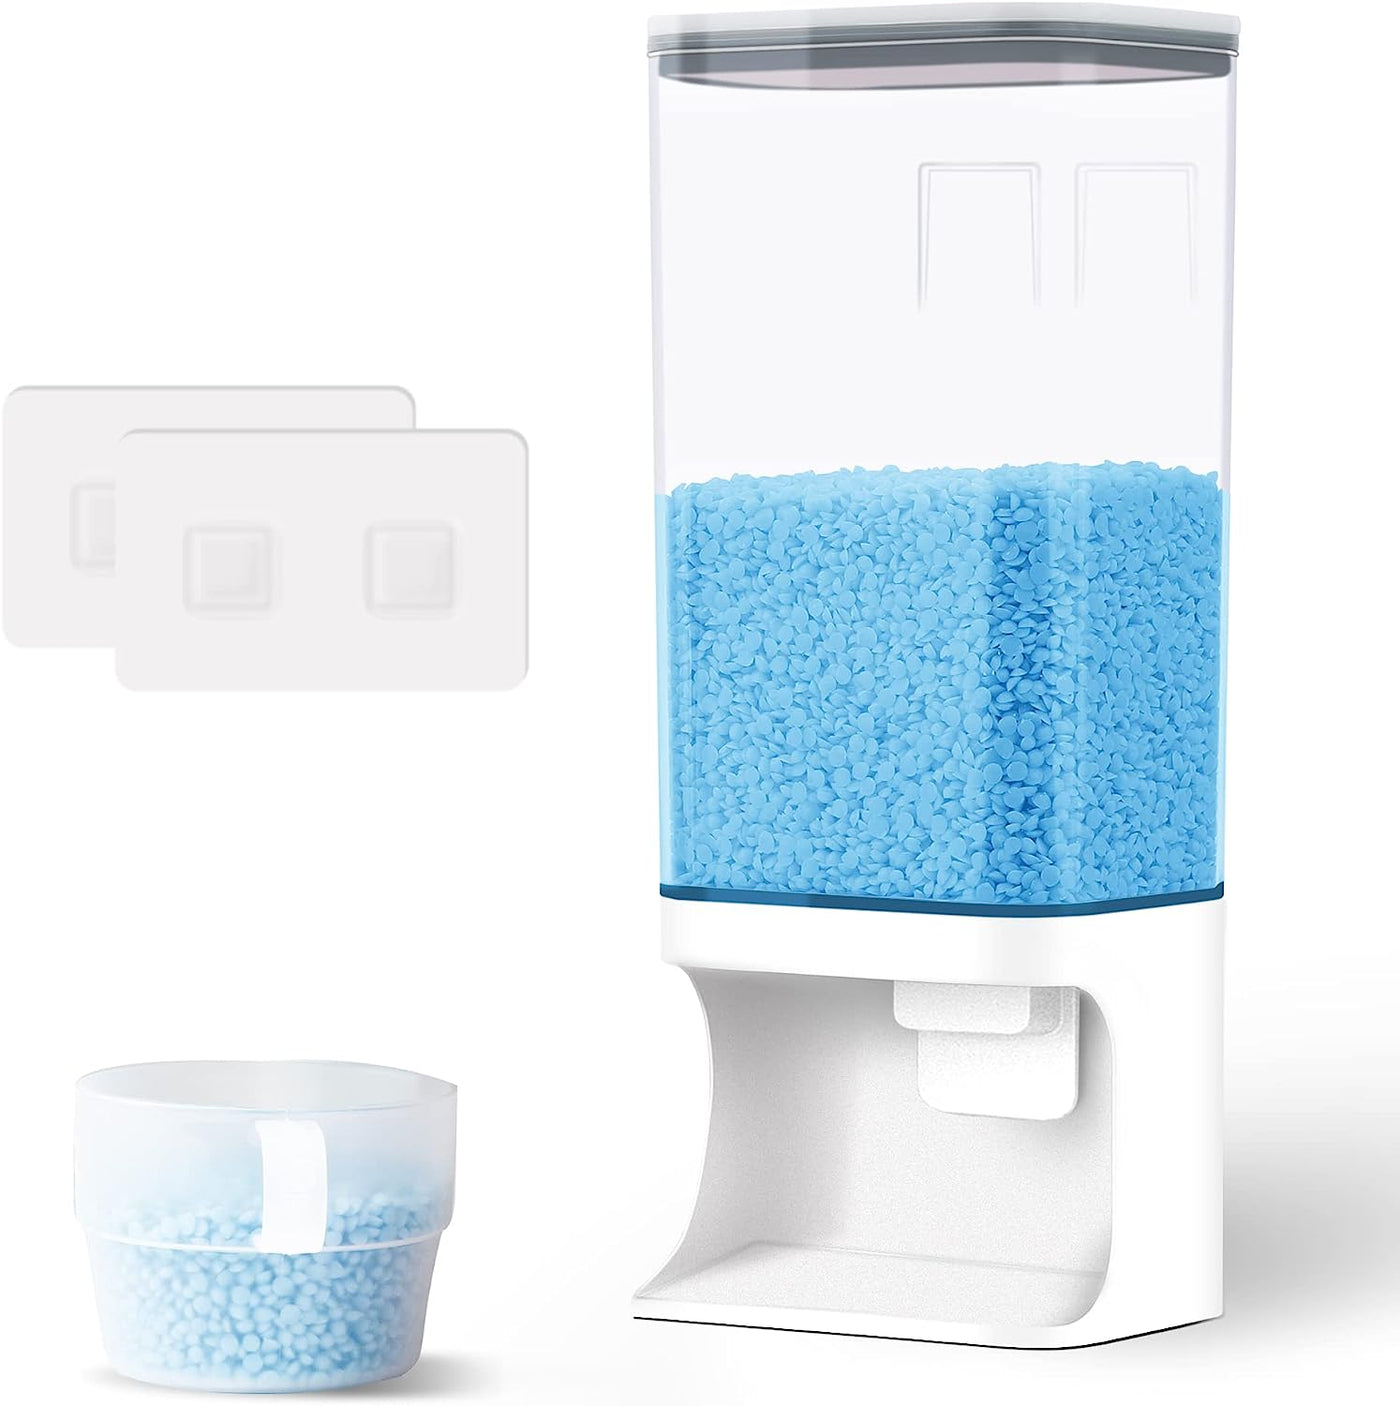 35 OZ Laundry Detergent Dispenser/Wall-Mounted Scent Booster Beads Dispenser for Laundry Room